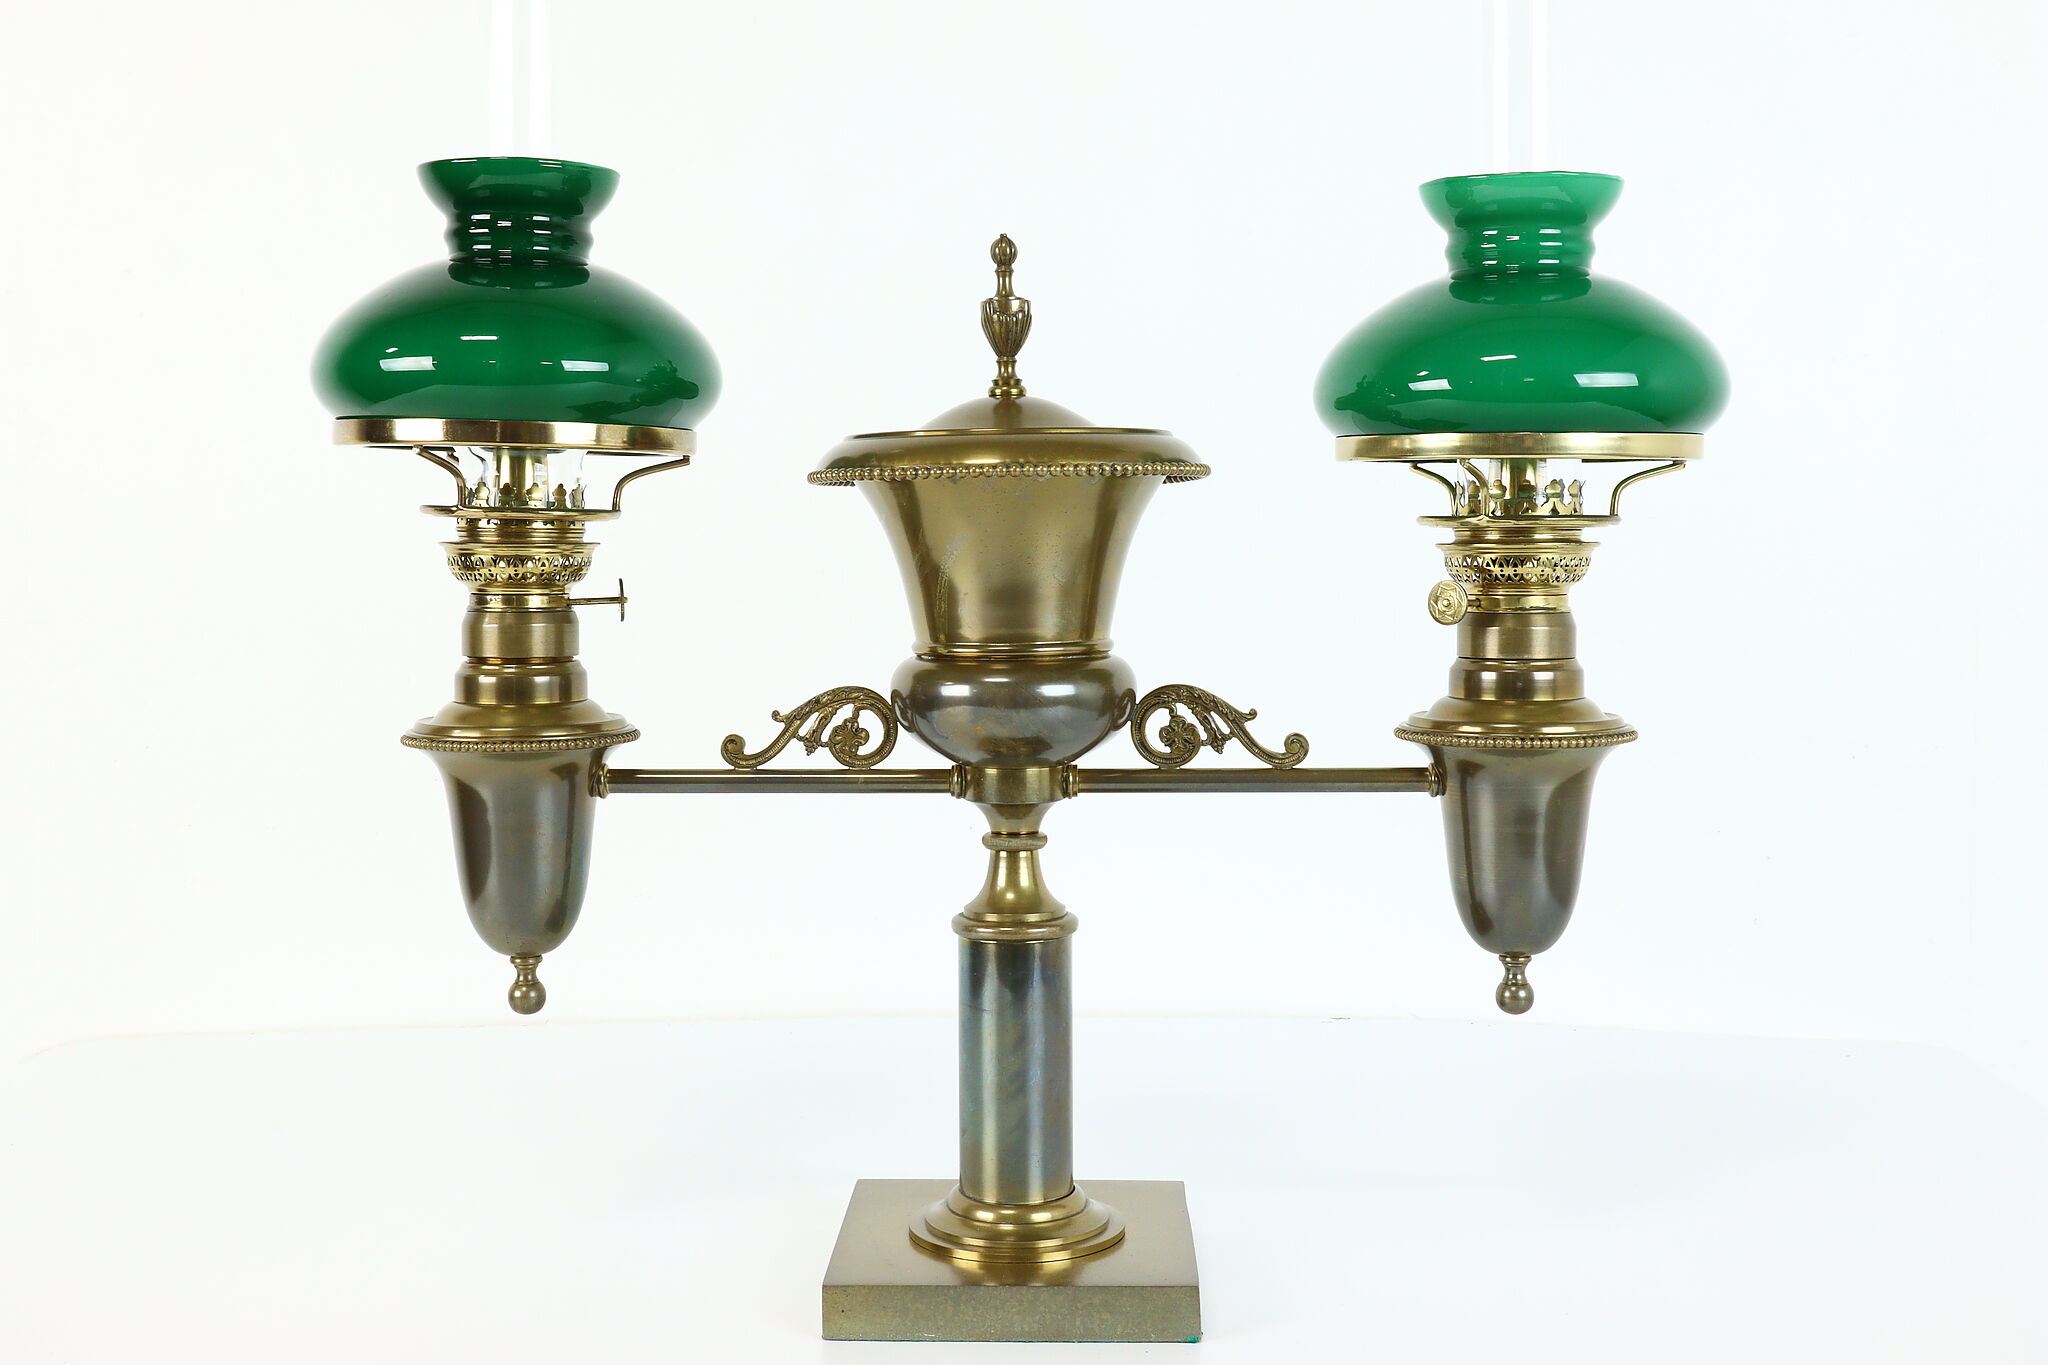 Antique Lamp, Brass Student Lamp W/ Two Emerald Shades, Lighting